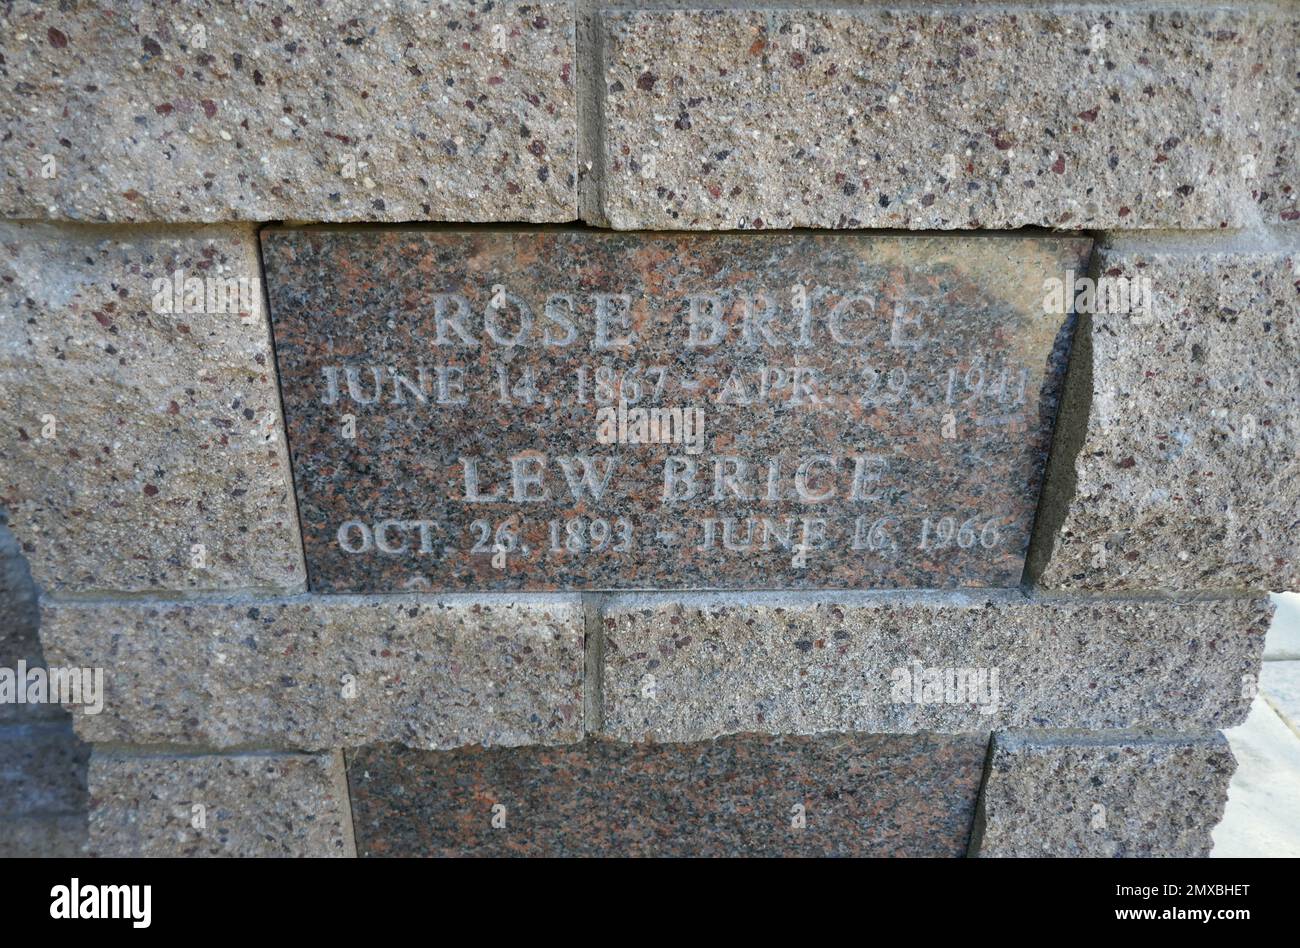 Los Angeles, California, USA 31st January 2023 A general view of atmosphere of Actor Lew Brice's Grave at Pierce Brothers Westwood Village Memorial Park Cemetery on January 31, 2023 in Los Angeles, California, USA. Photo by Barry King/Alamy Stock Photo Stock Photo